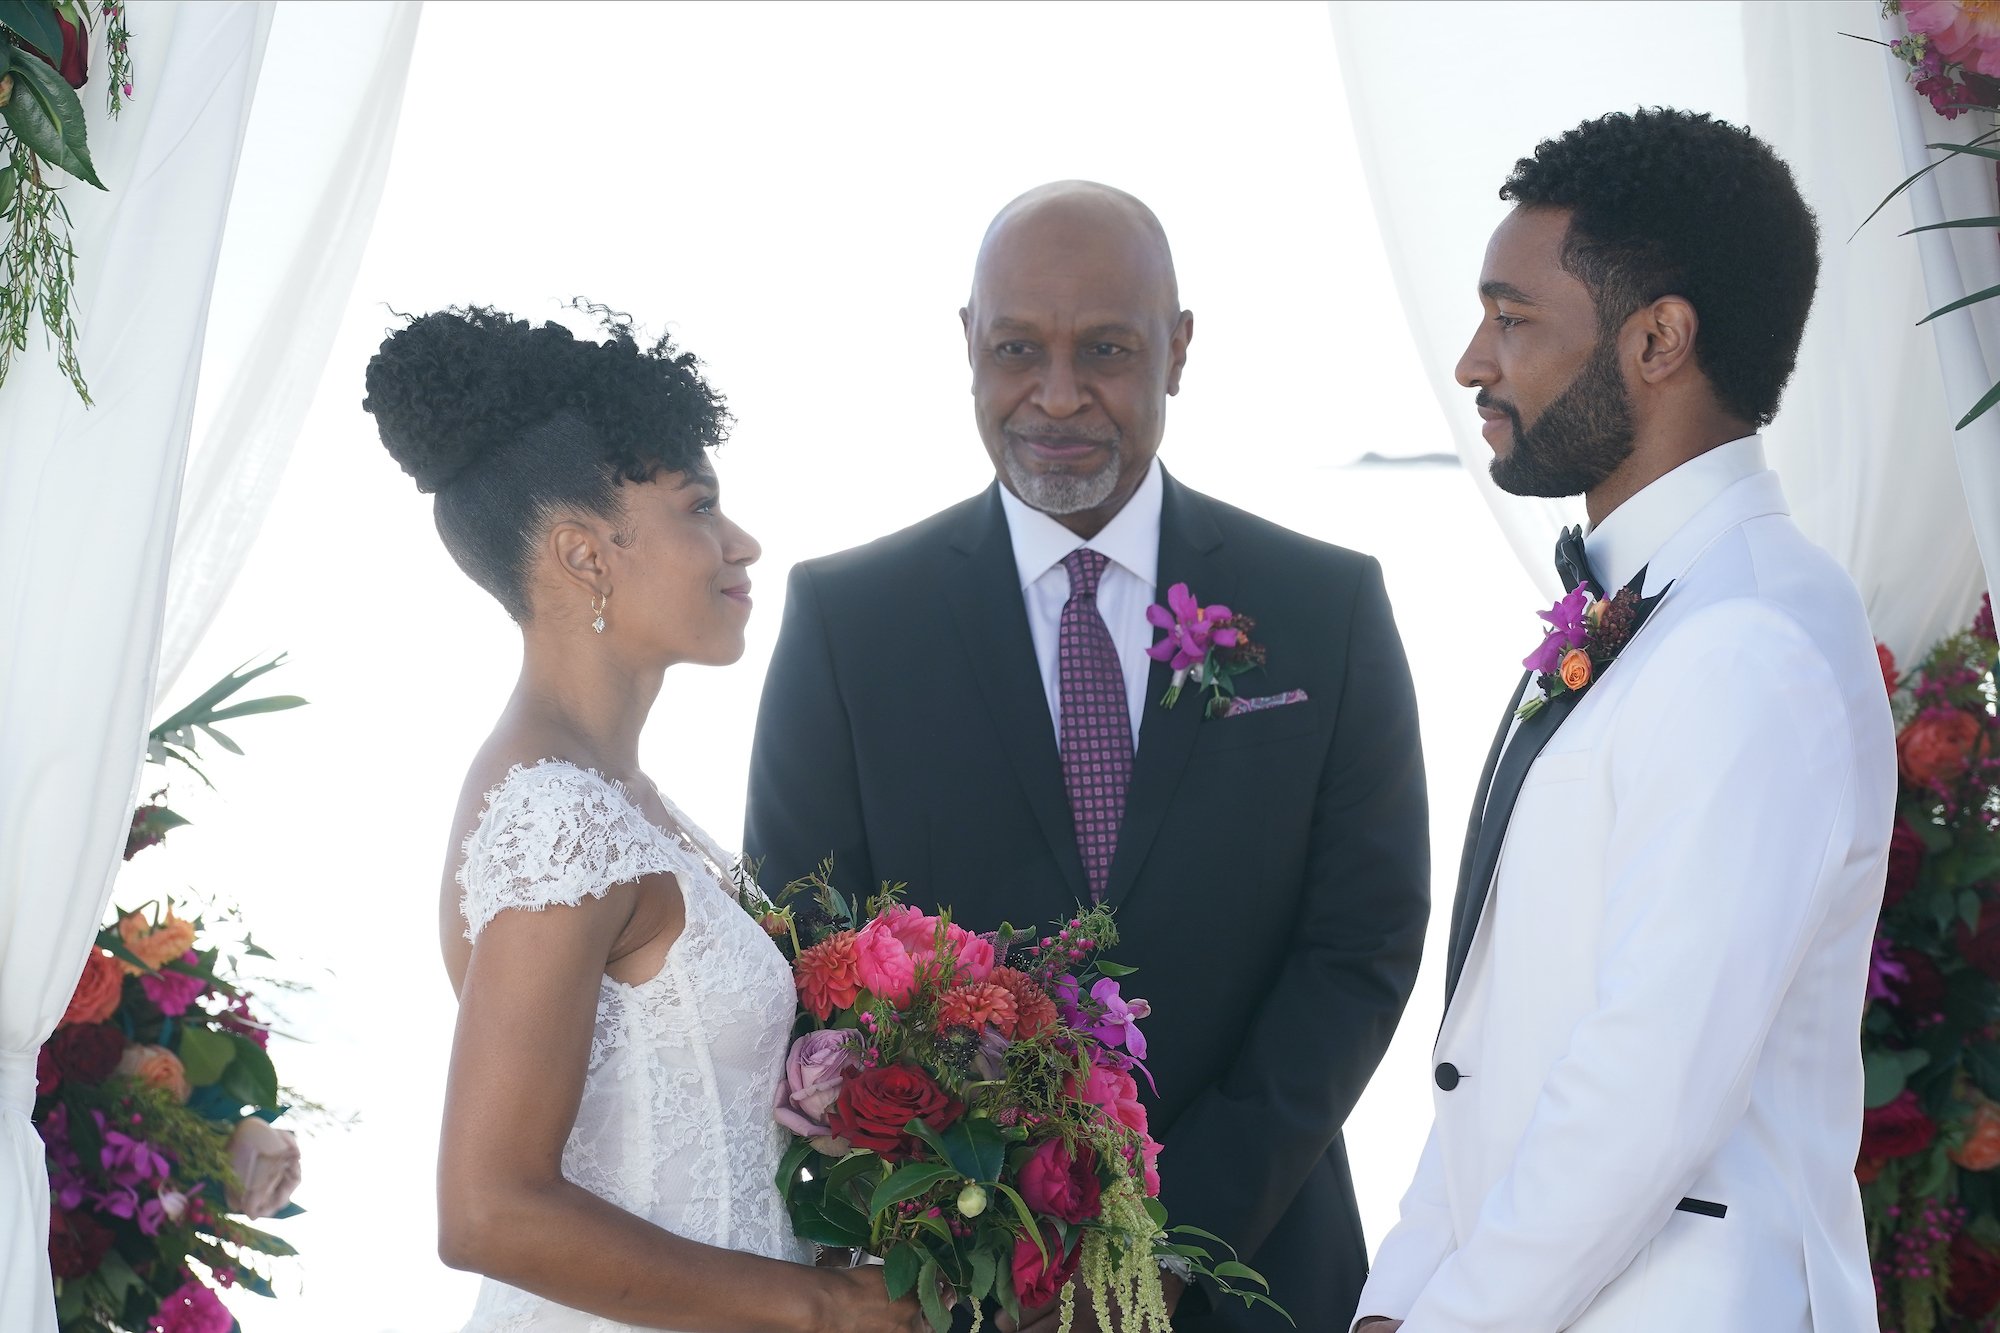 KELLY MCCREARY, JAMES PICKENS JR., ANTHONY HILL